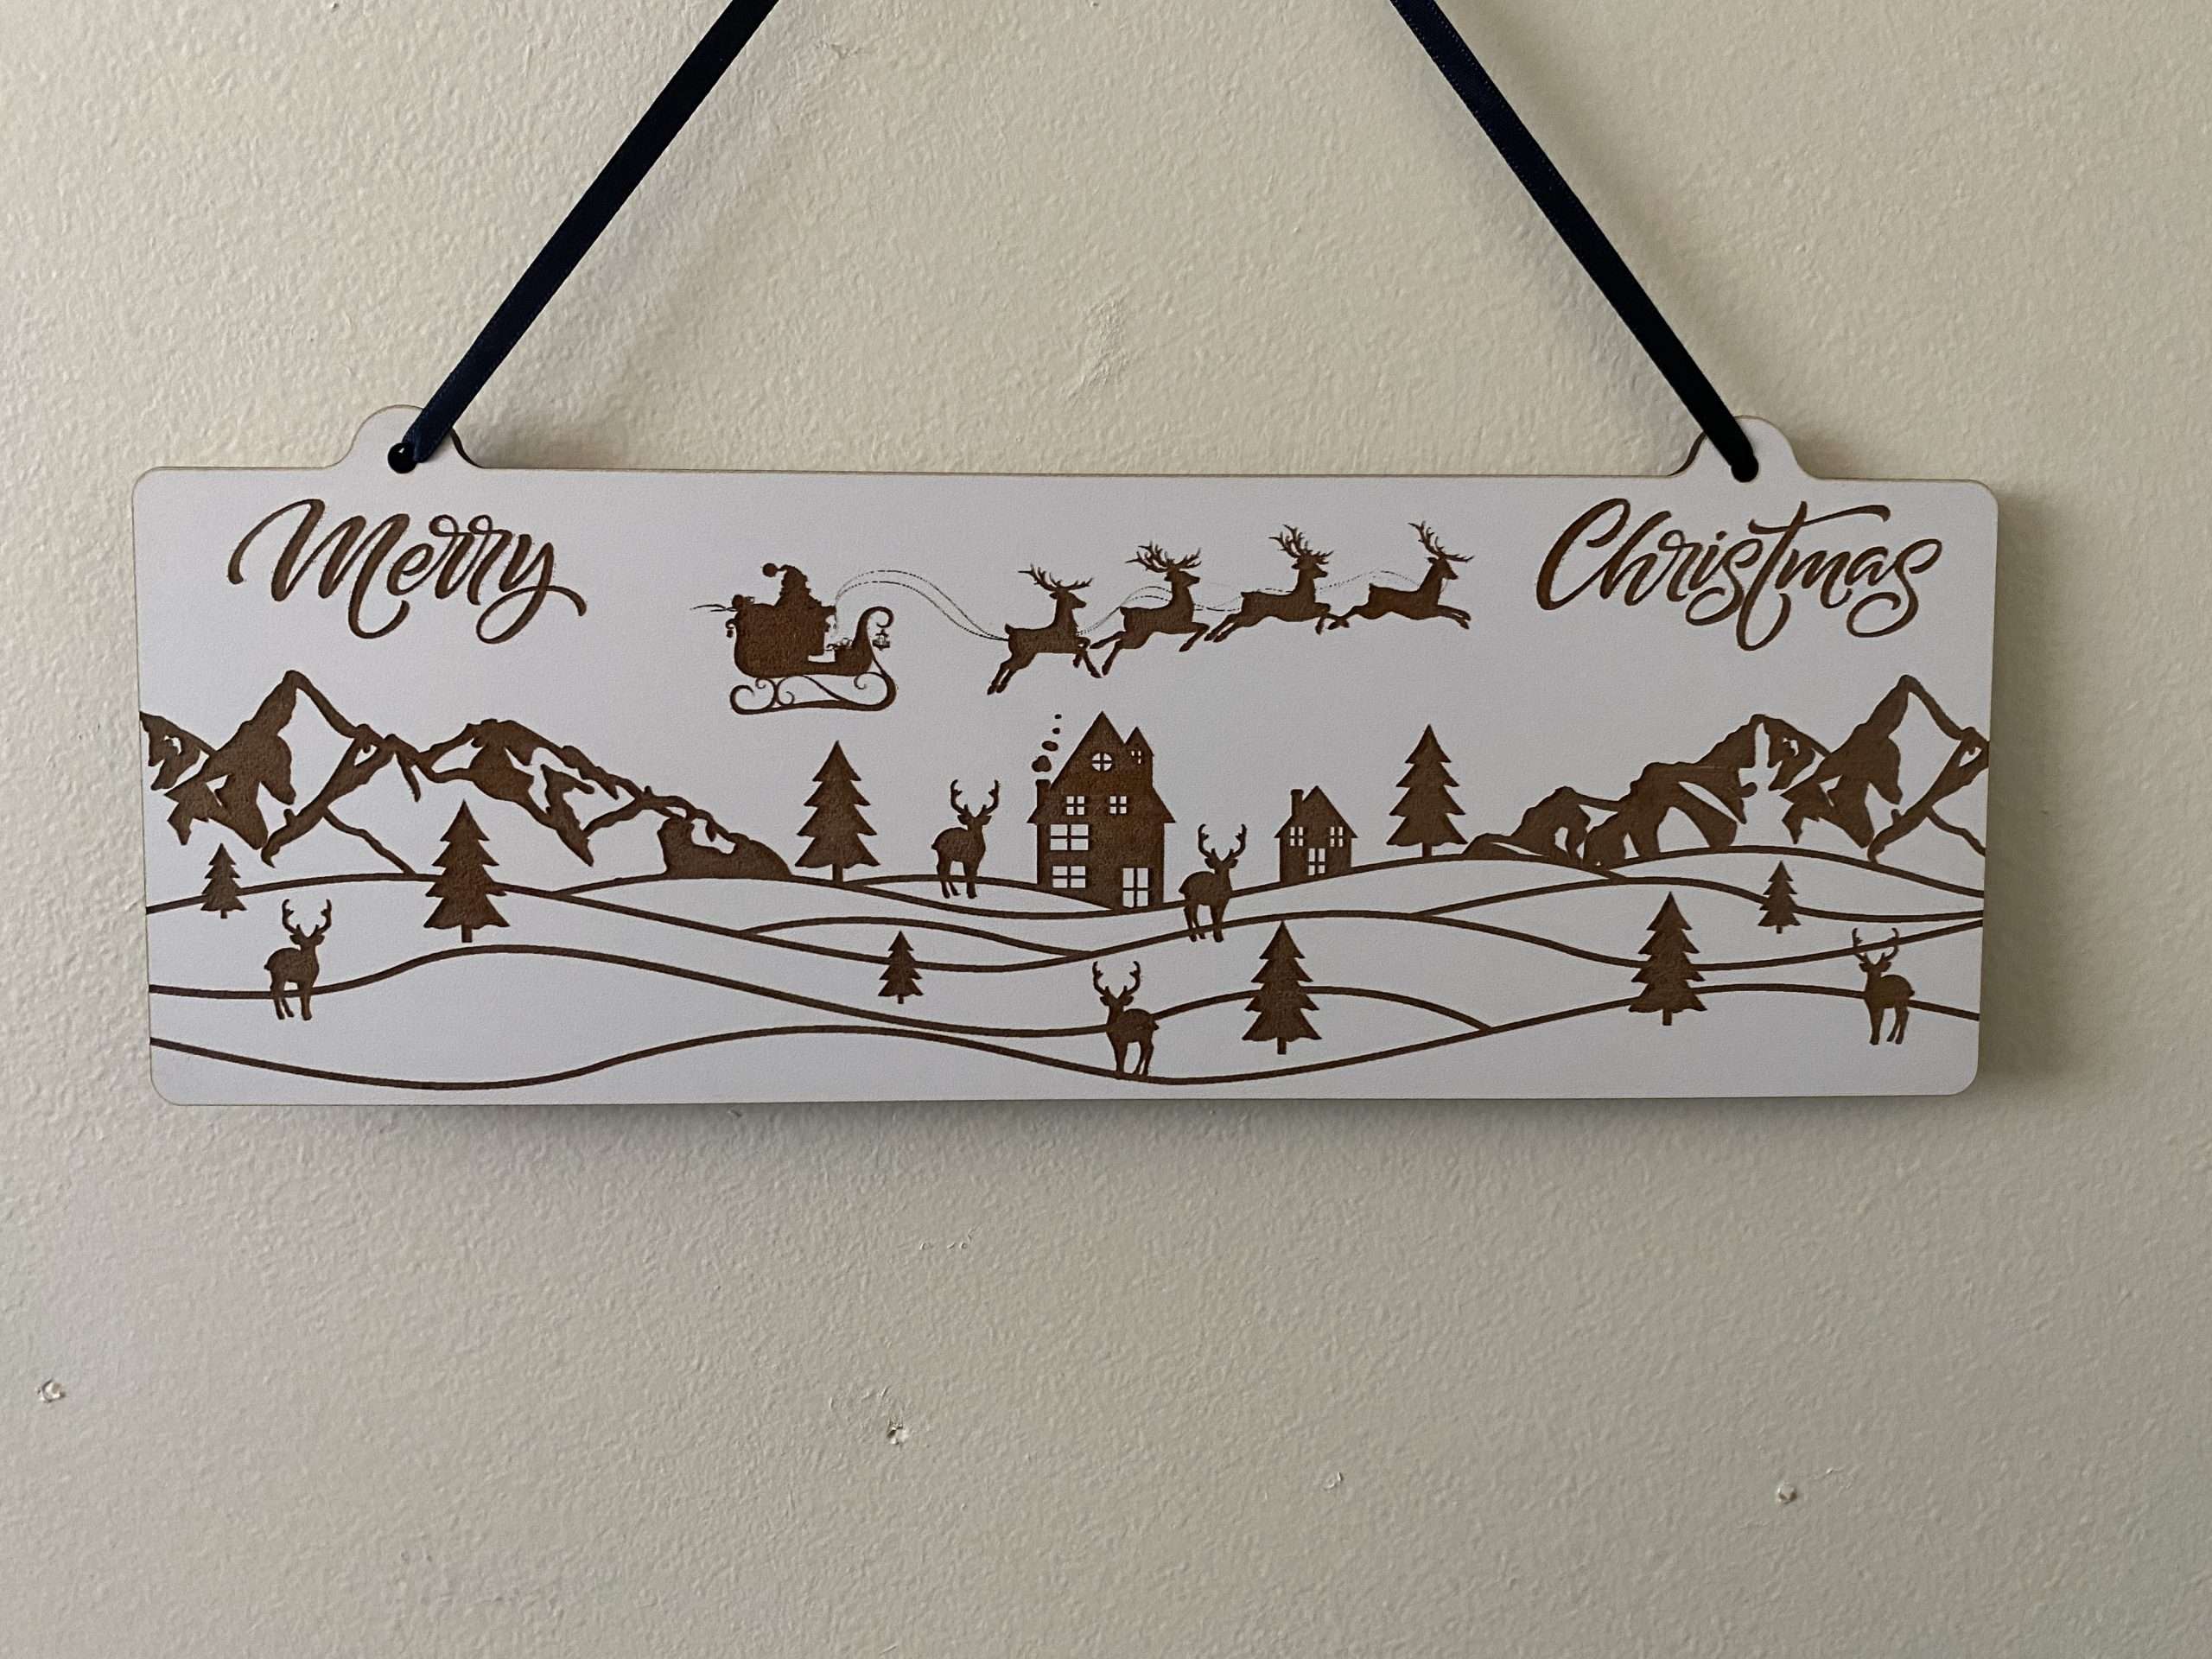 20230925 095312999 iOS scaled Decorative Christmas wall hanger depicting Christmas scene laser cut from 3mm White MDF.